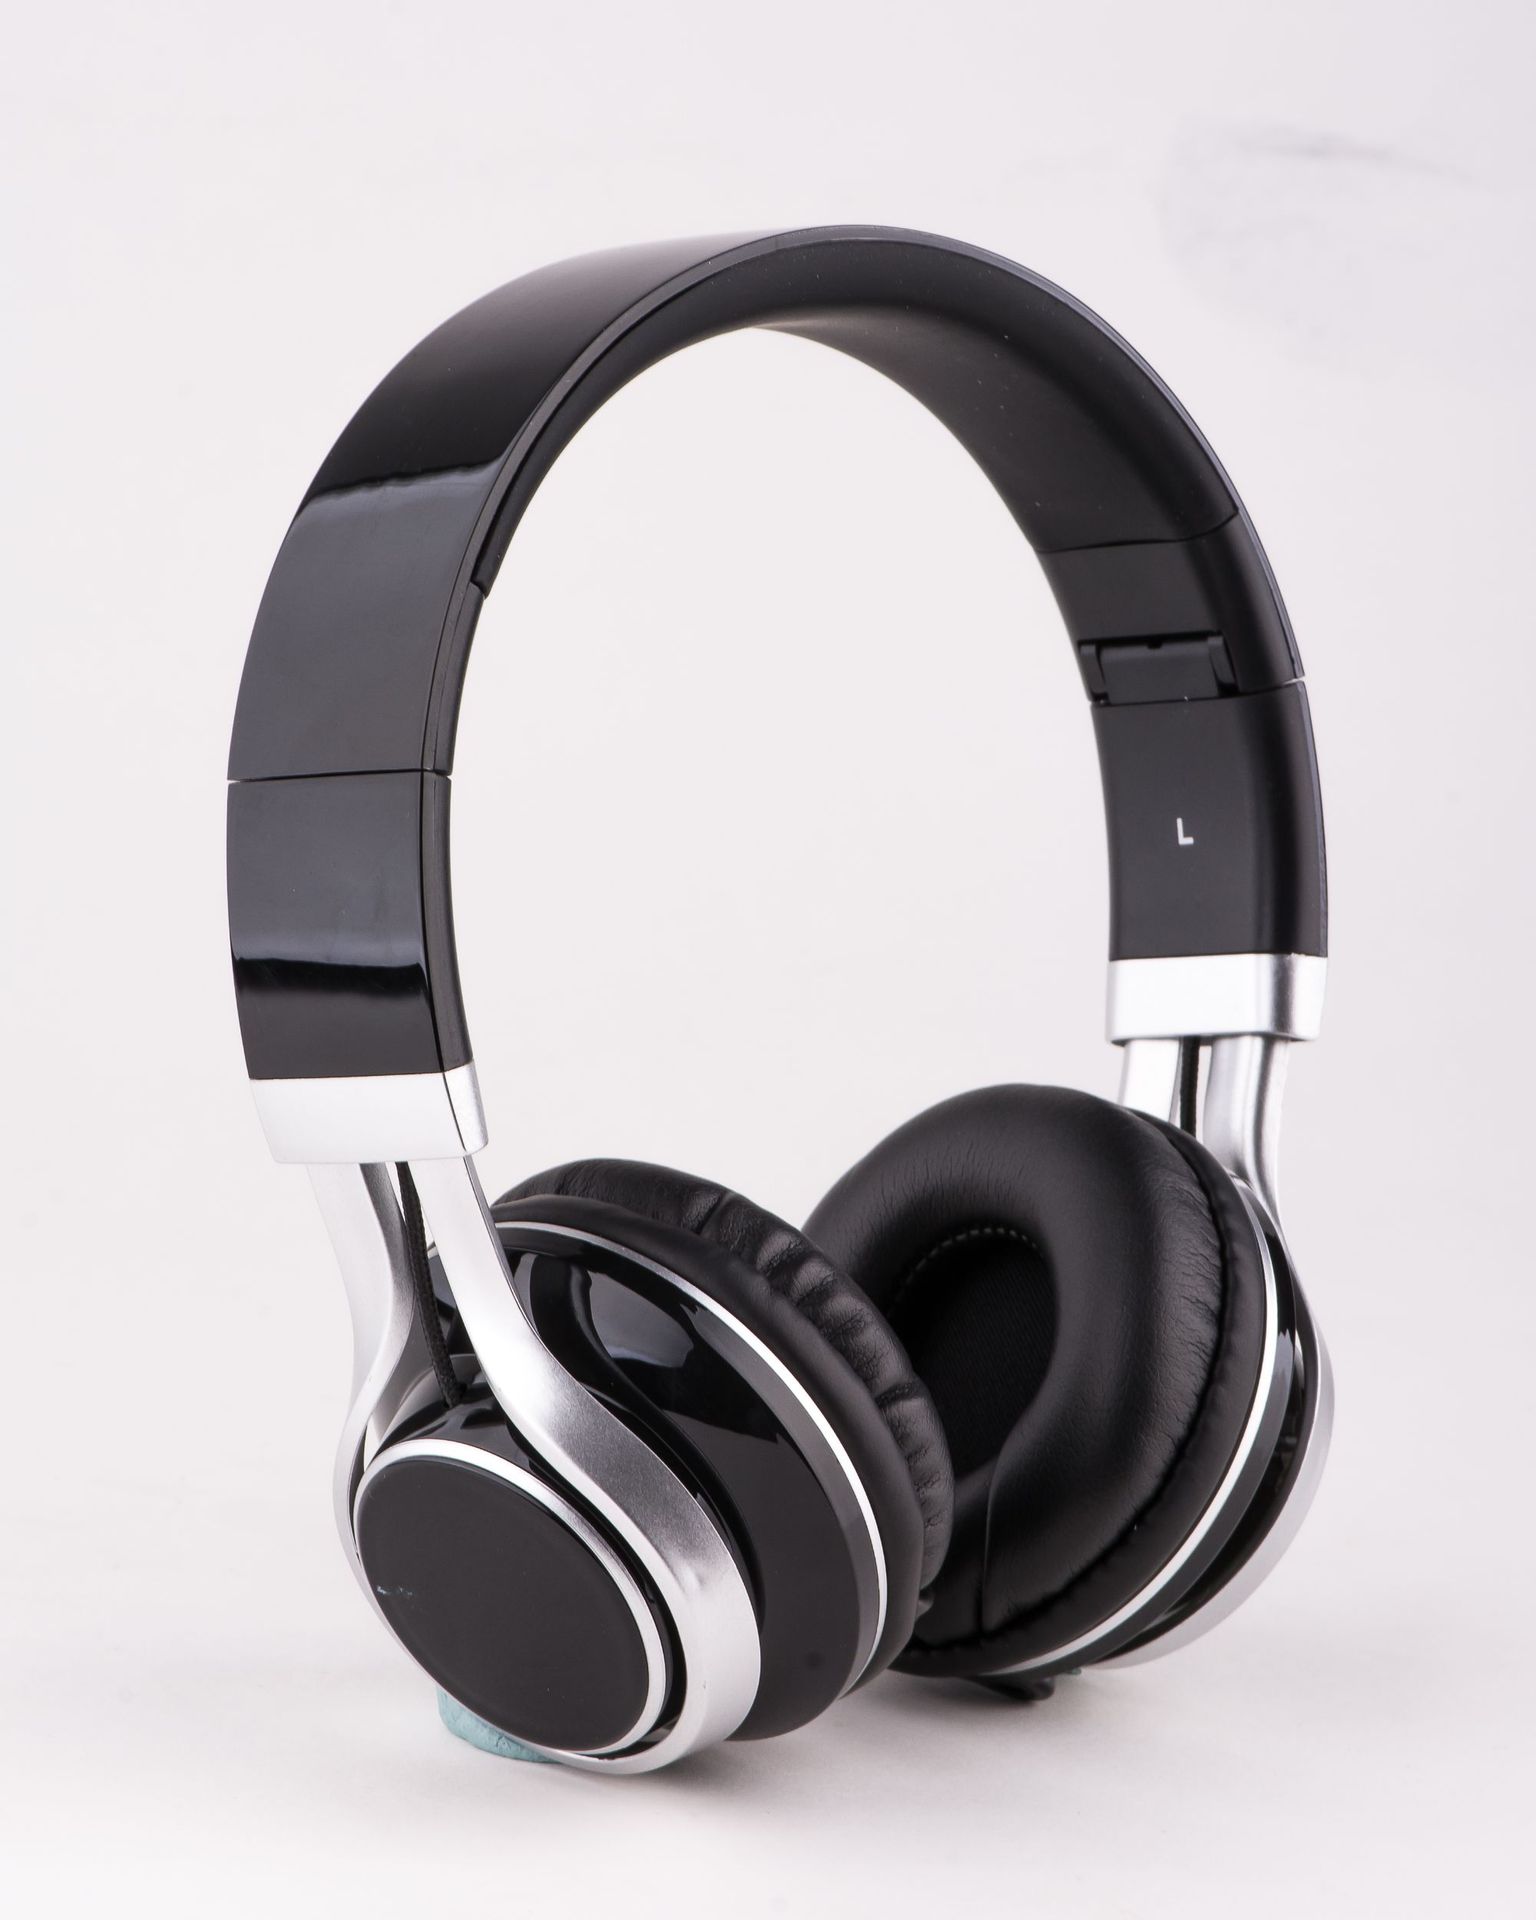 Customizable Audio Solutions: OEM Foldable Headsets by GCC ELECTRONIC